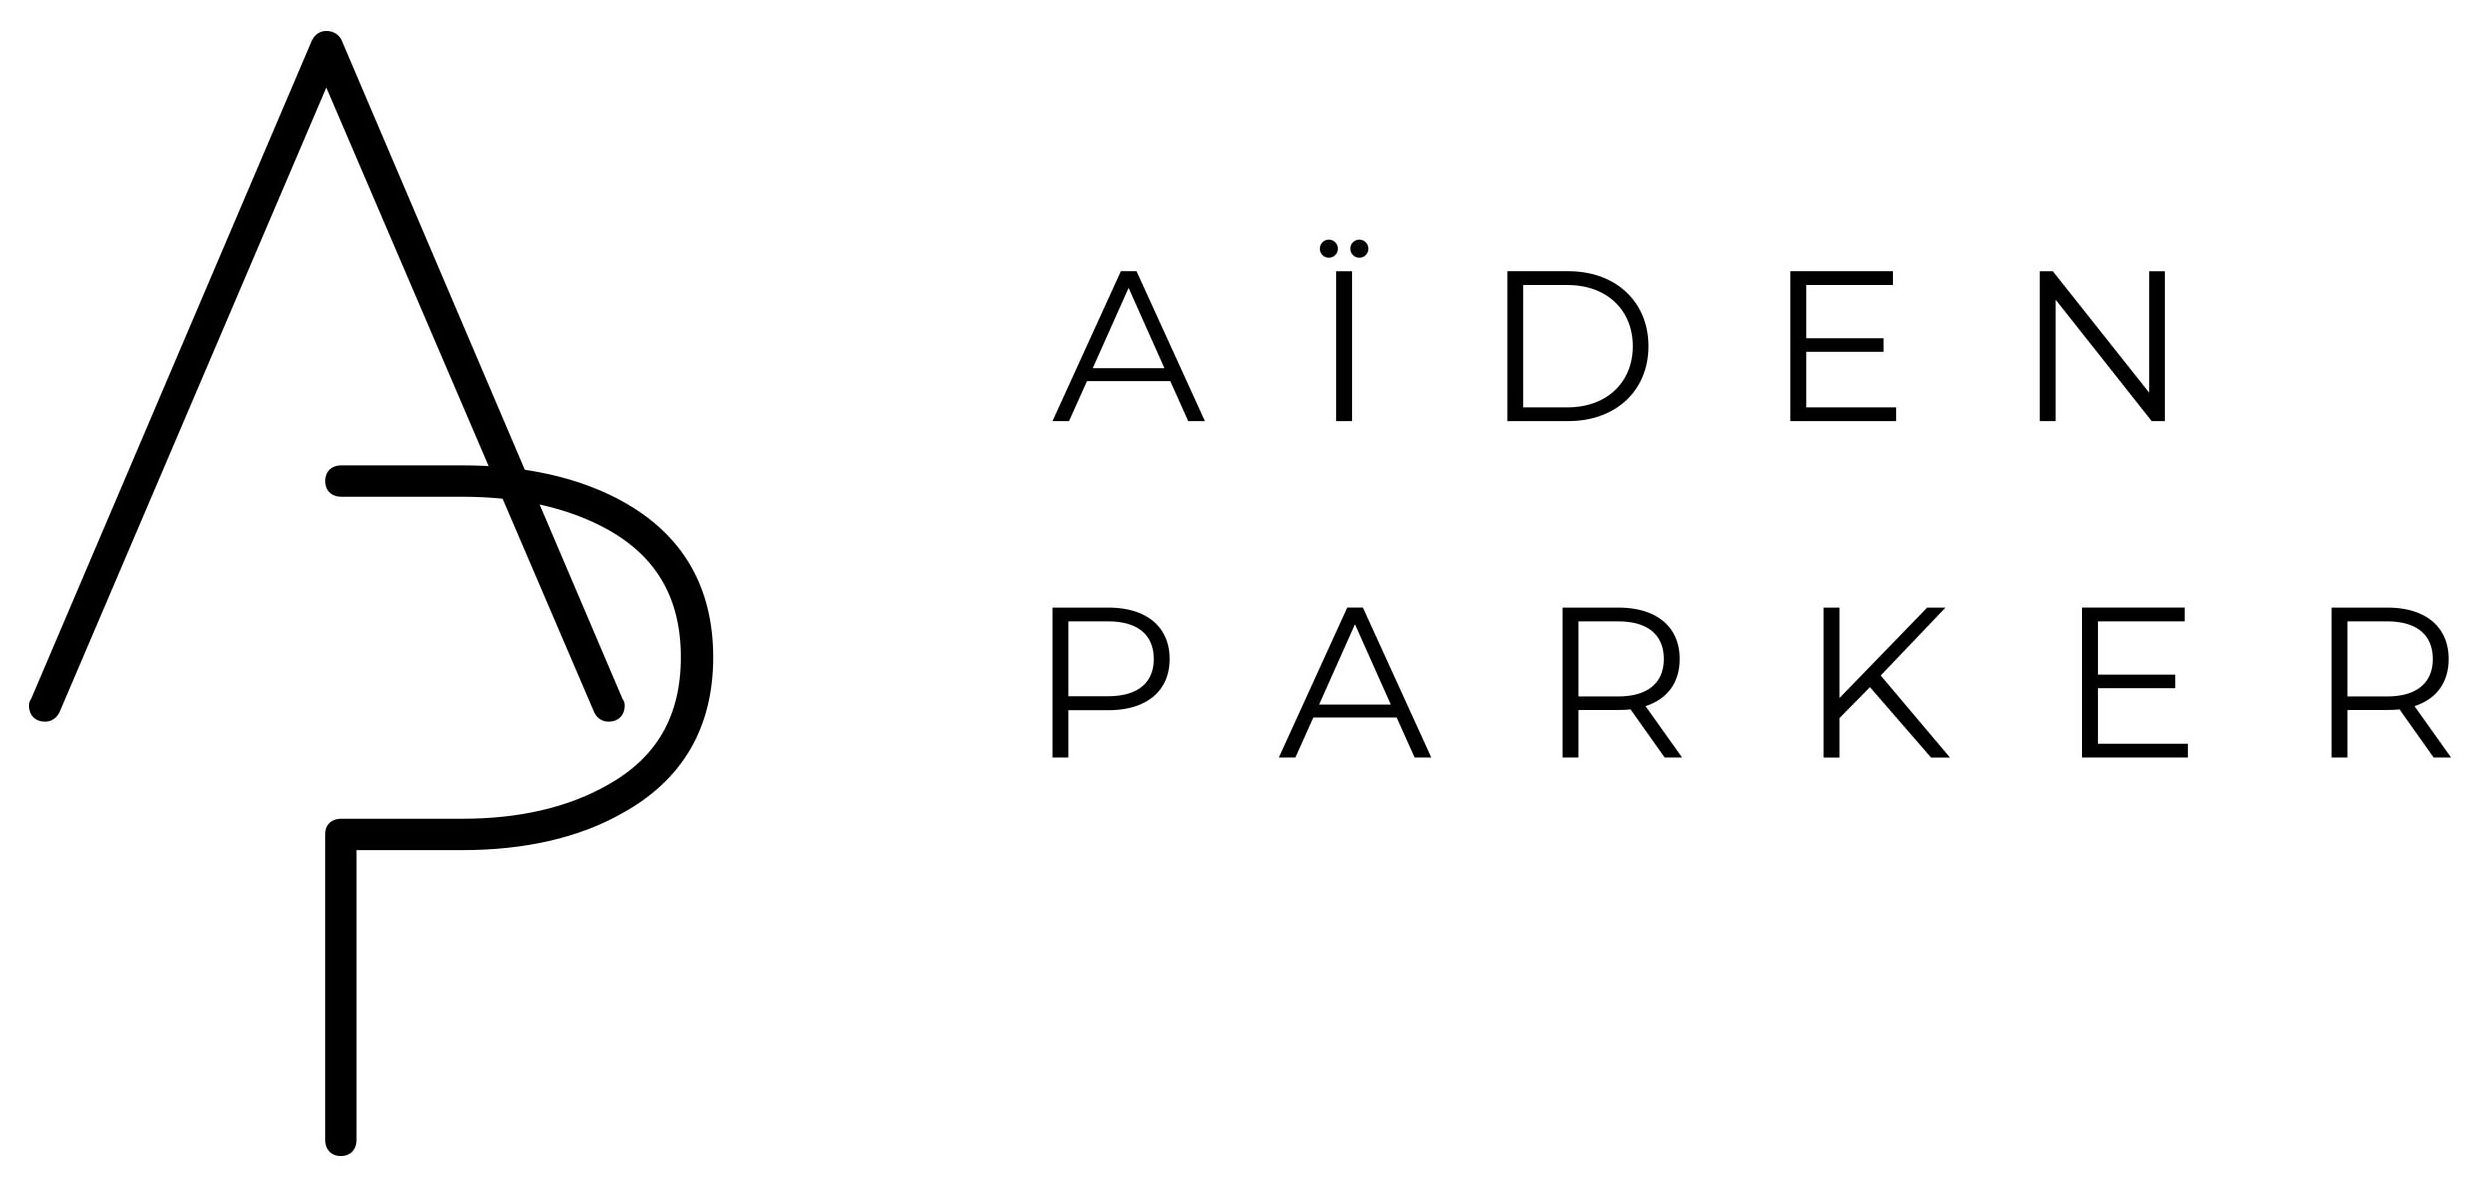  AIDEN PARKER WITH A CUSTOM LOGO WITH THE LETTERS A AND P